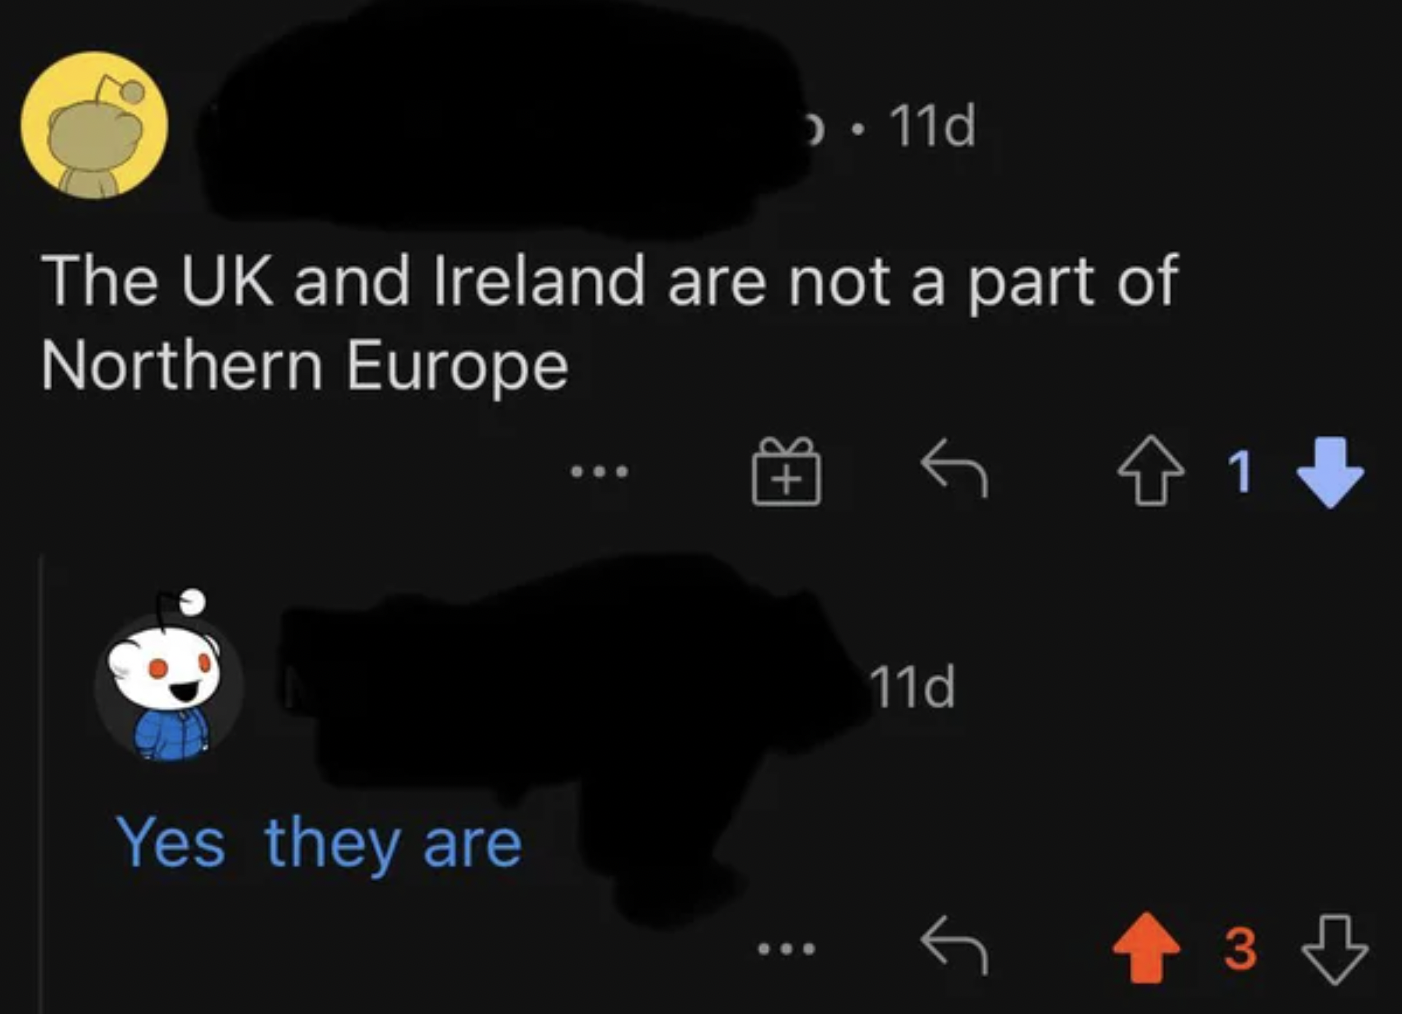 Confidently incorrect people - light - The Uk and Ireland are not a part of Northern Europe